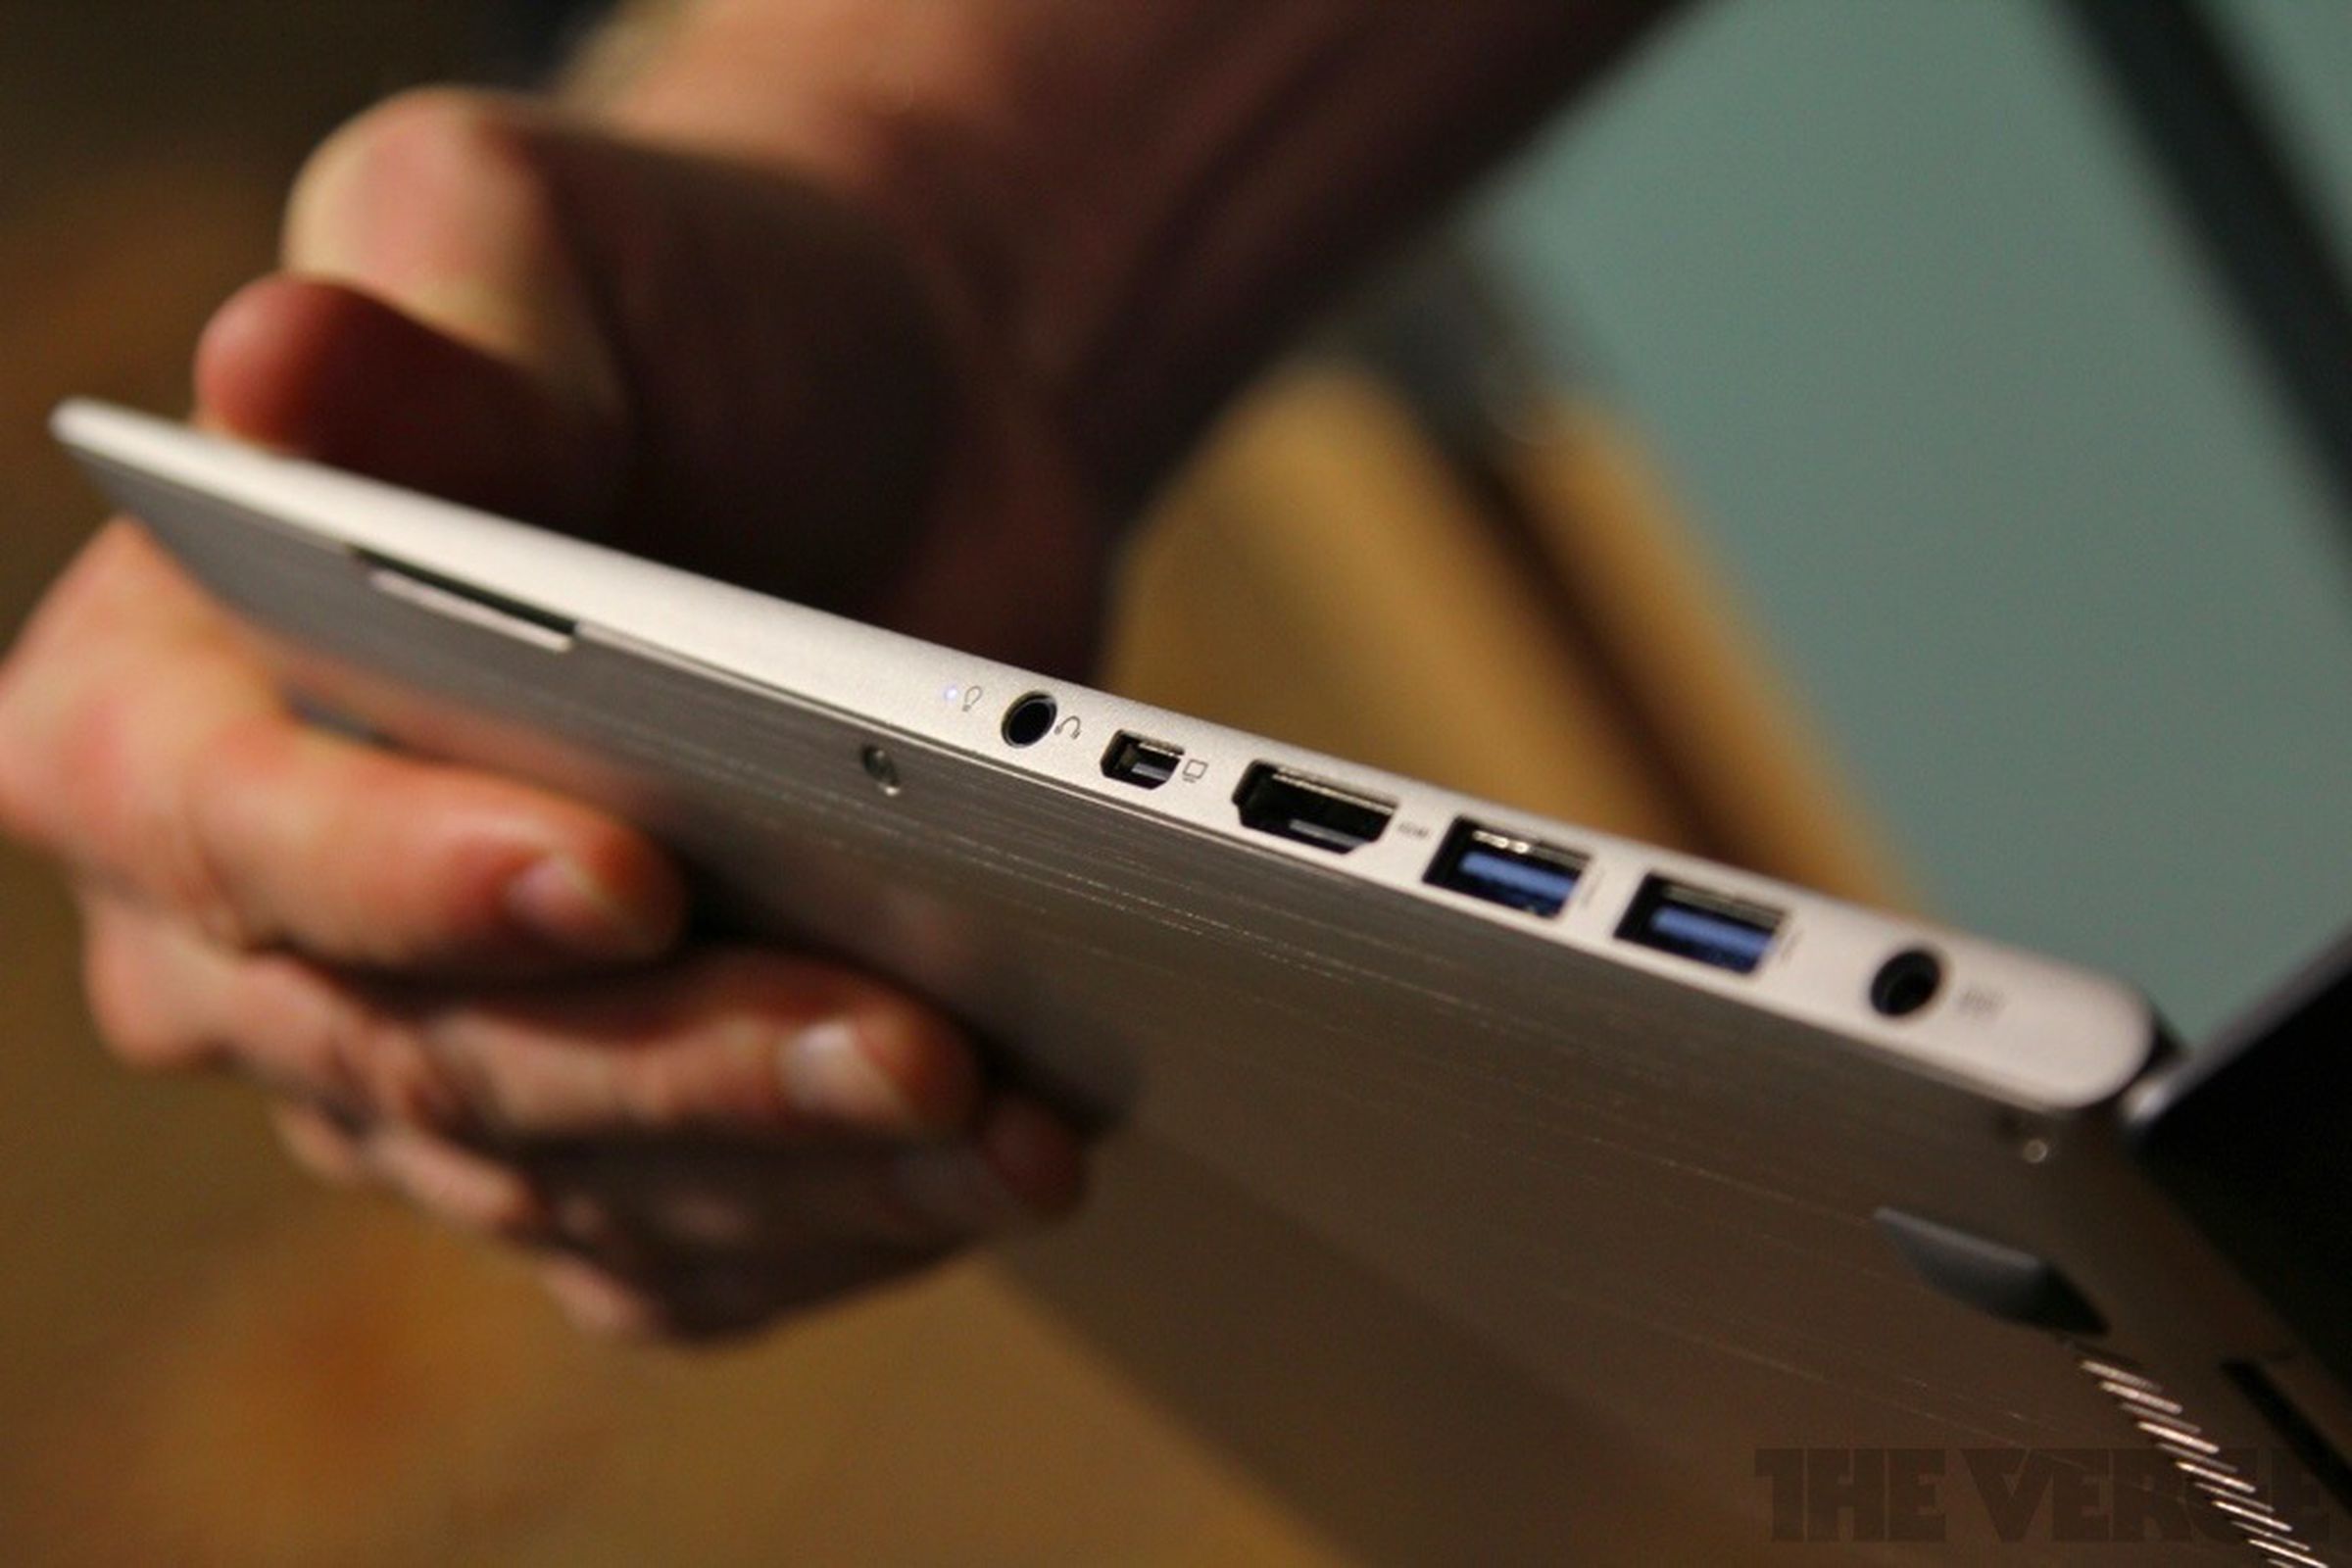 Gallery Photo: Asus Zenbook Prime UX32VD hands-on pictures